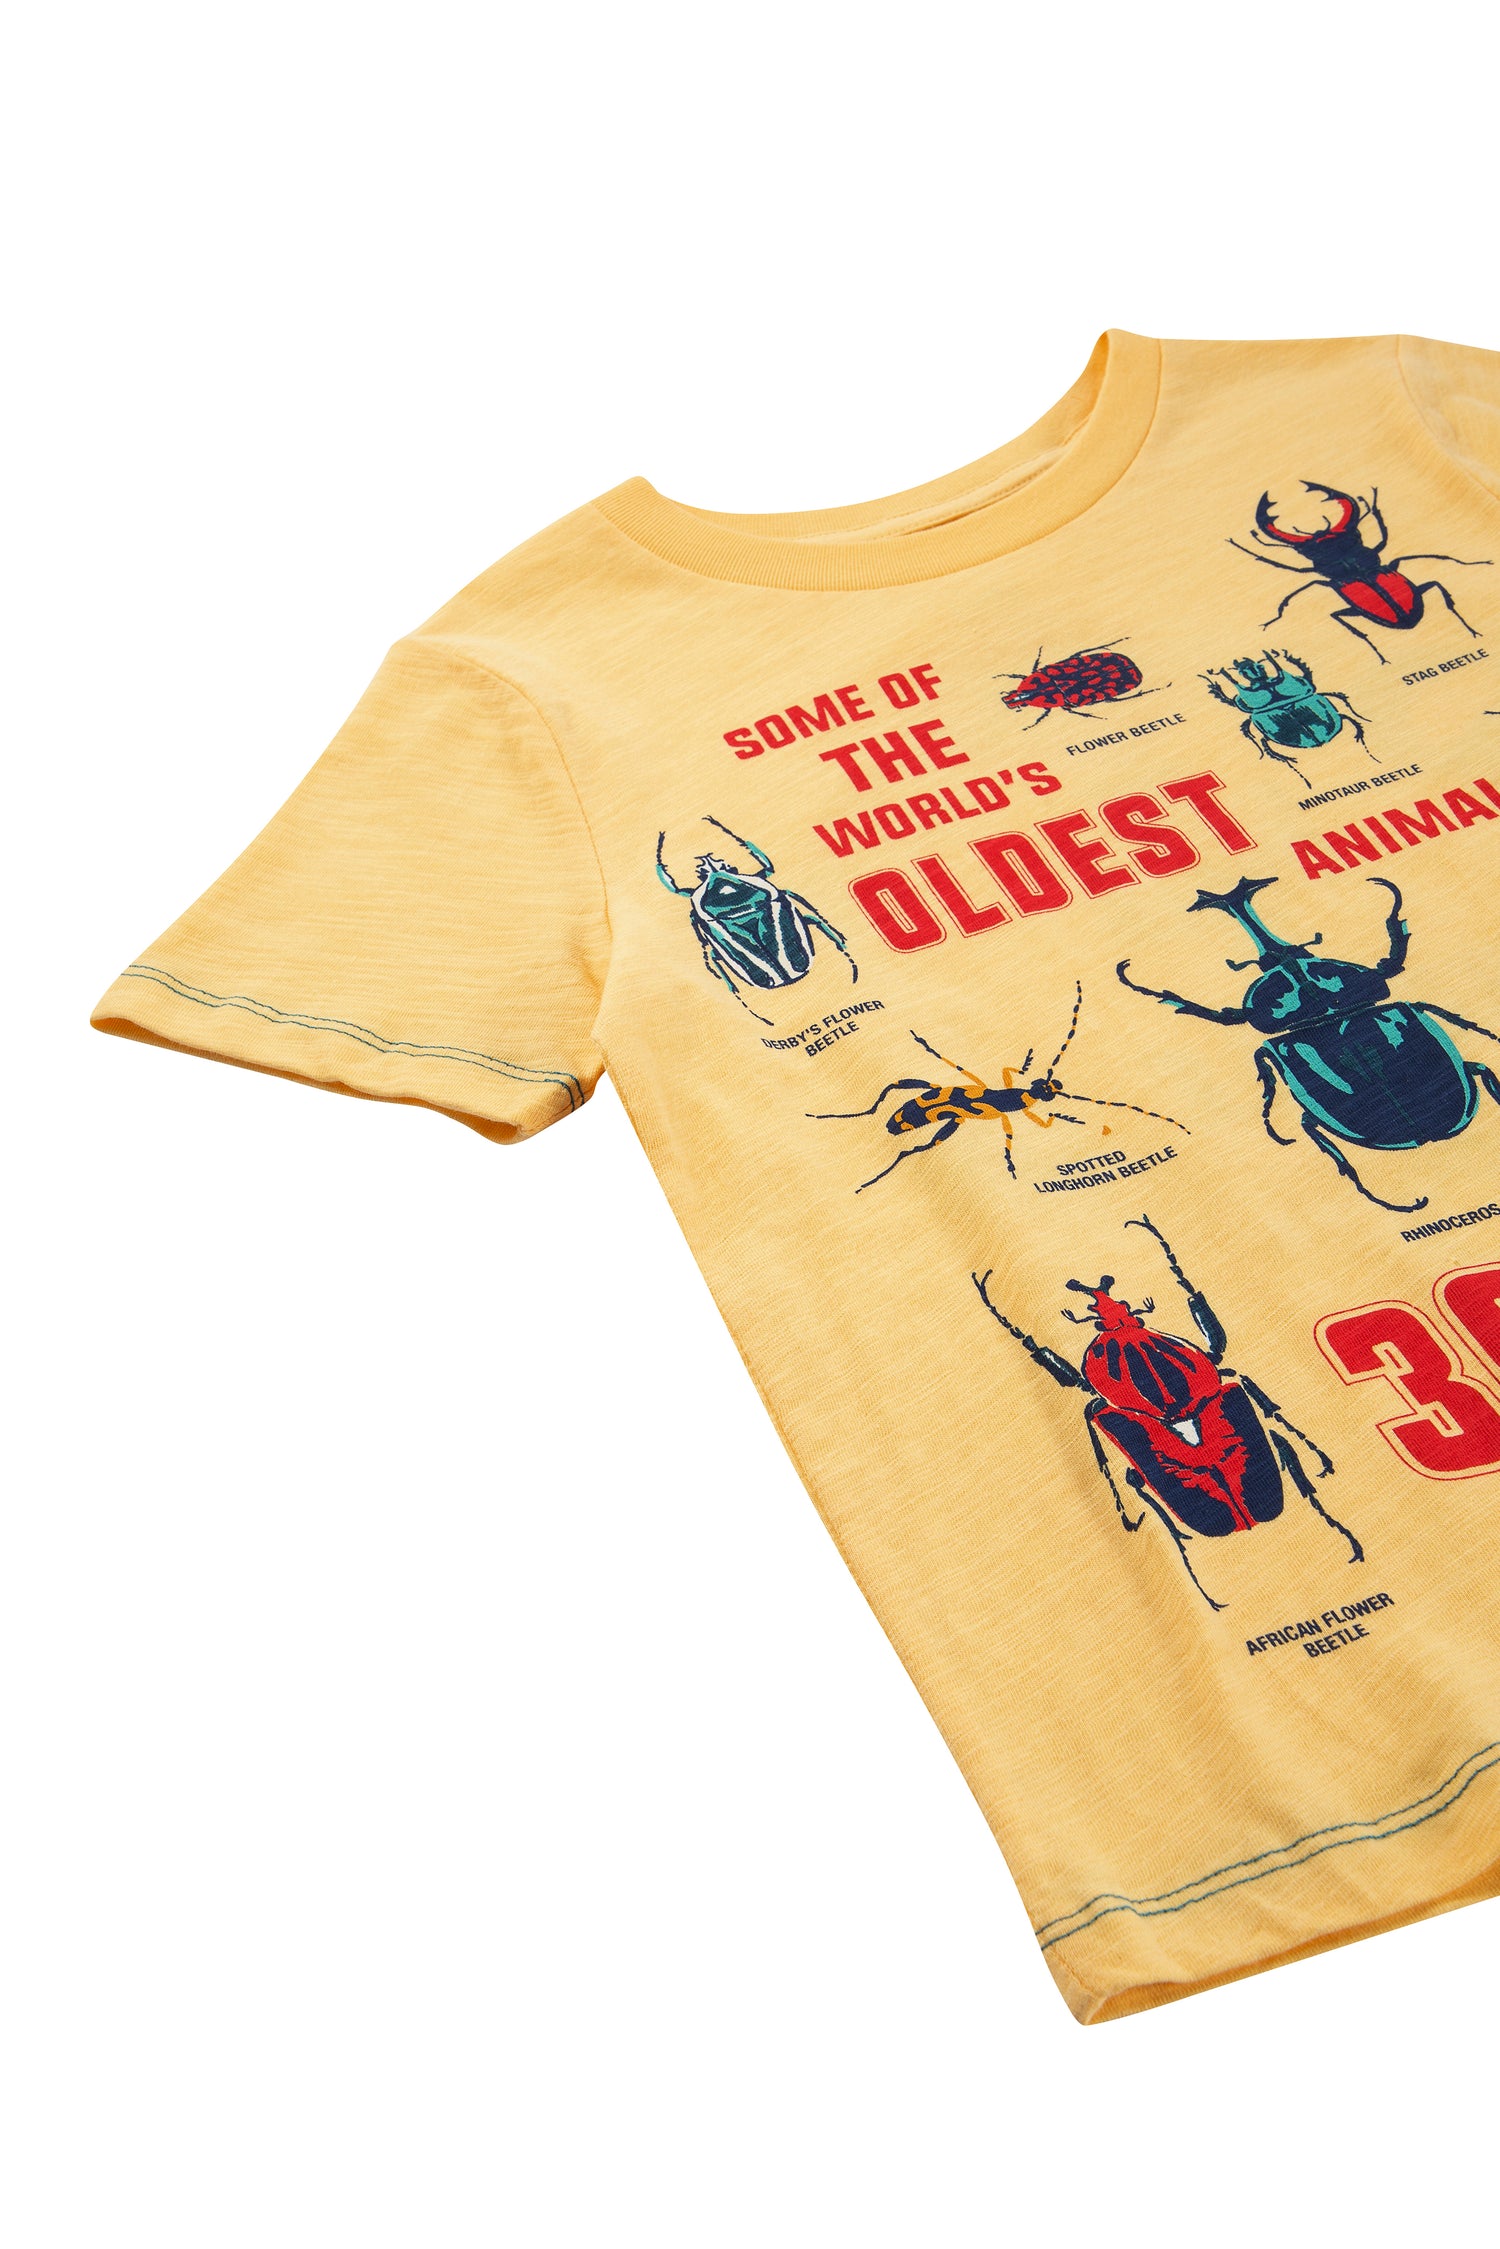 CLOSE UP OF YELLOW T-SHIRT WITH THE LIFE CYCLE OF A BEETLE GRAPHICS